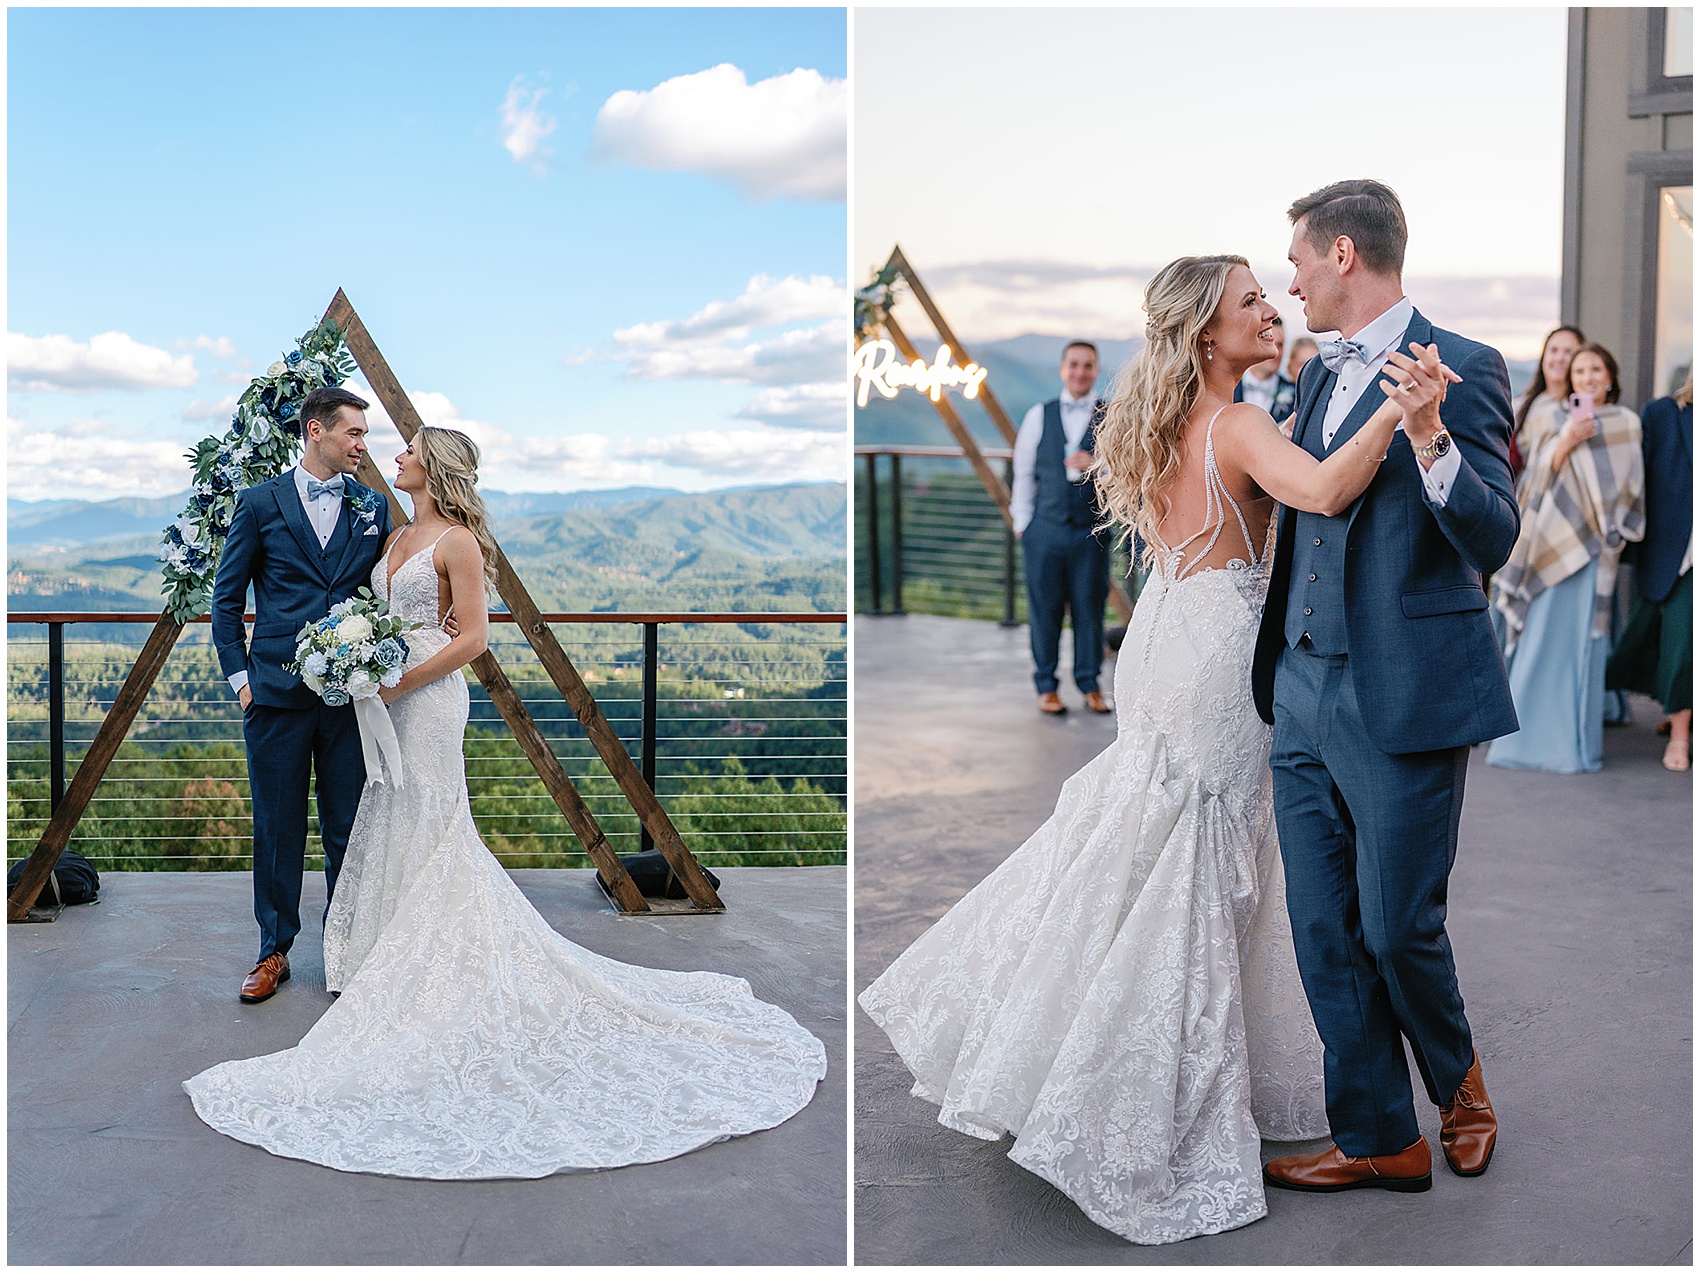 Newlyweds dance for the first time at sunset on an outdoor patio in a blue suit and lace dress at the trillium venue